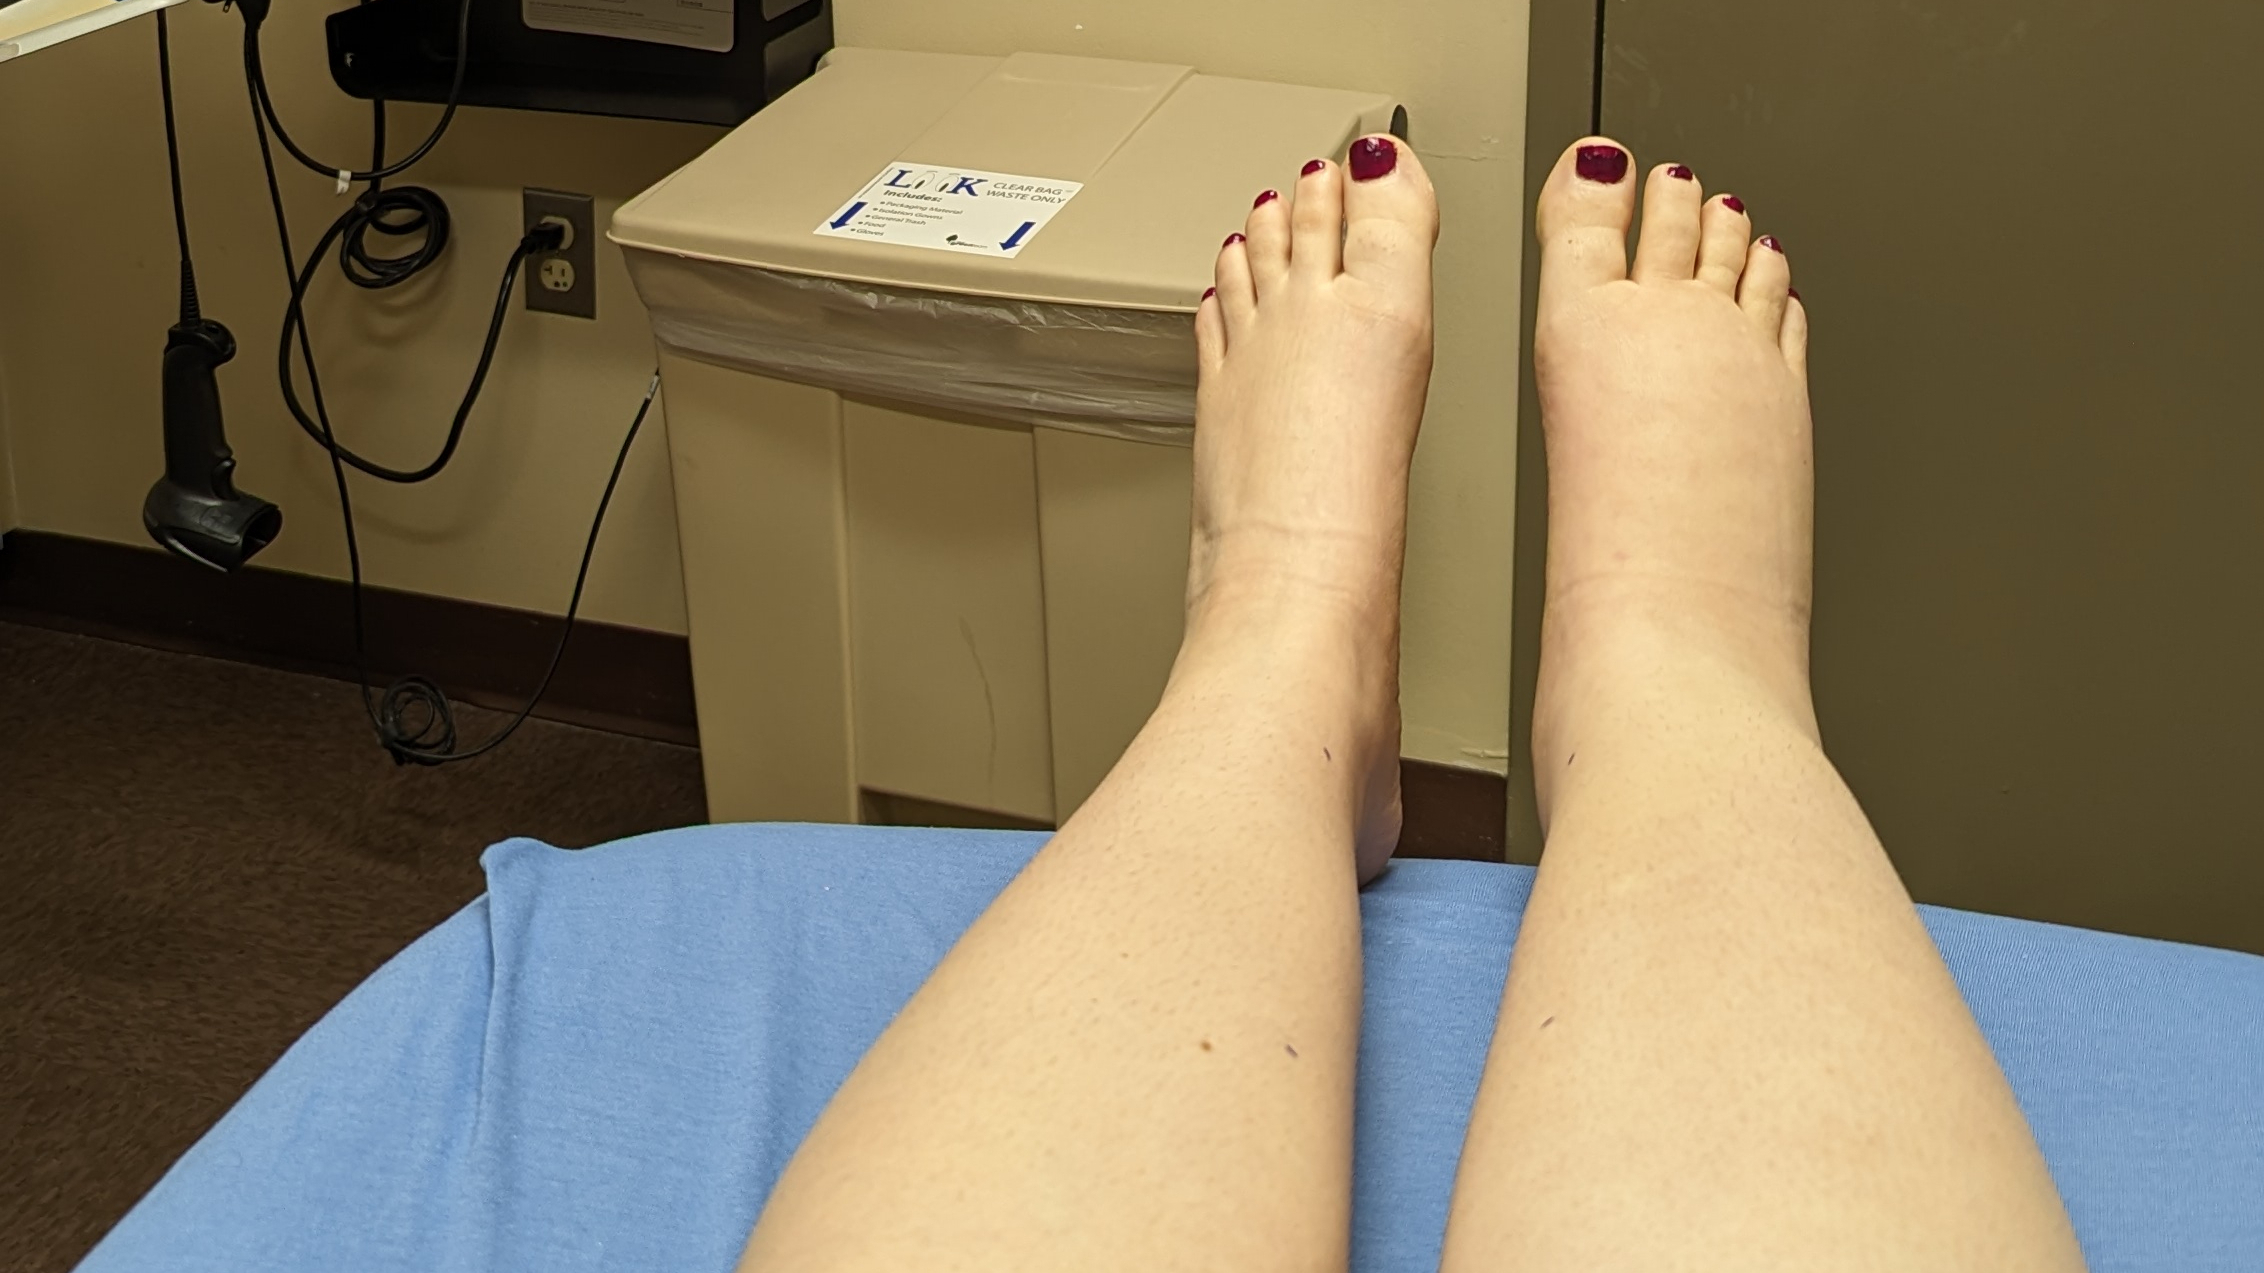 A view of Alexa's outstretched legs from her perspective while sitting on a bed in a clinic exam room.